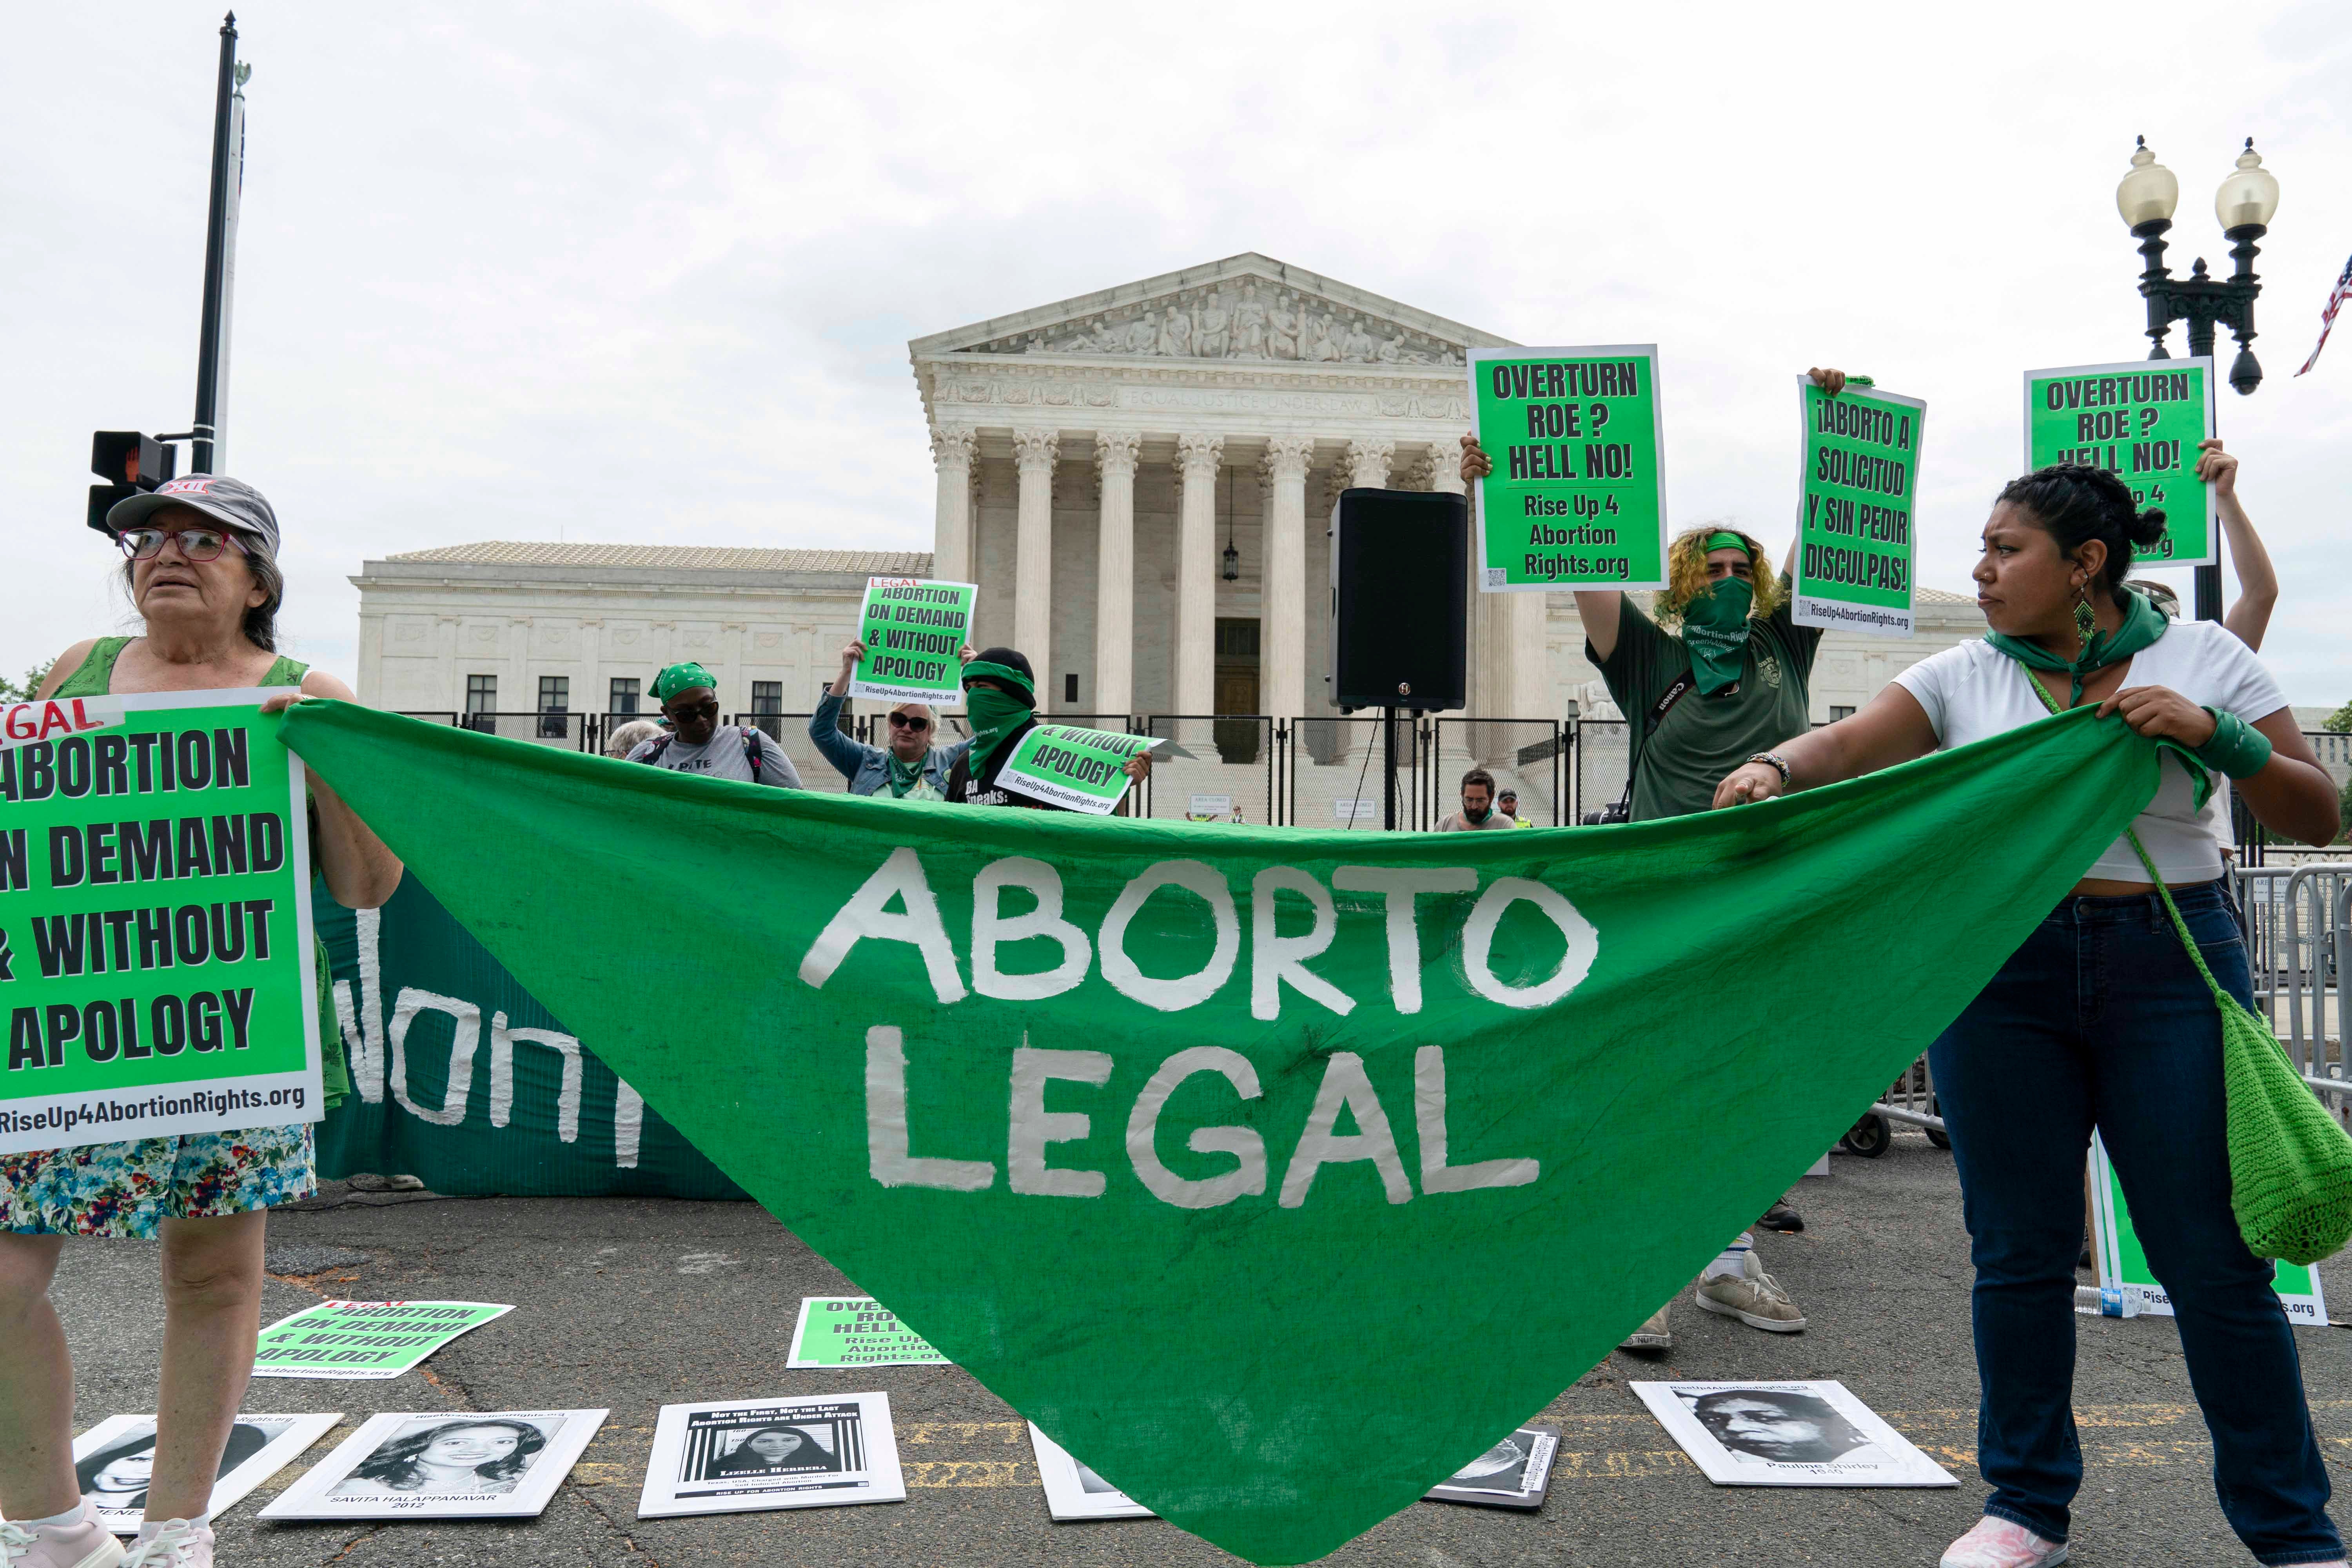 Abortion rights activists protest outside of the U.S. Supreme Court on Capitol Hill in Washington, DC, Tuesday, June 21, 2022.